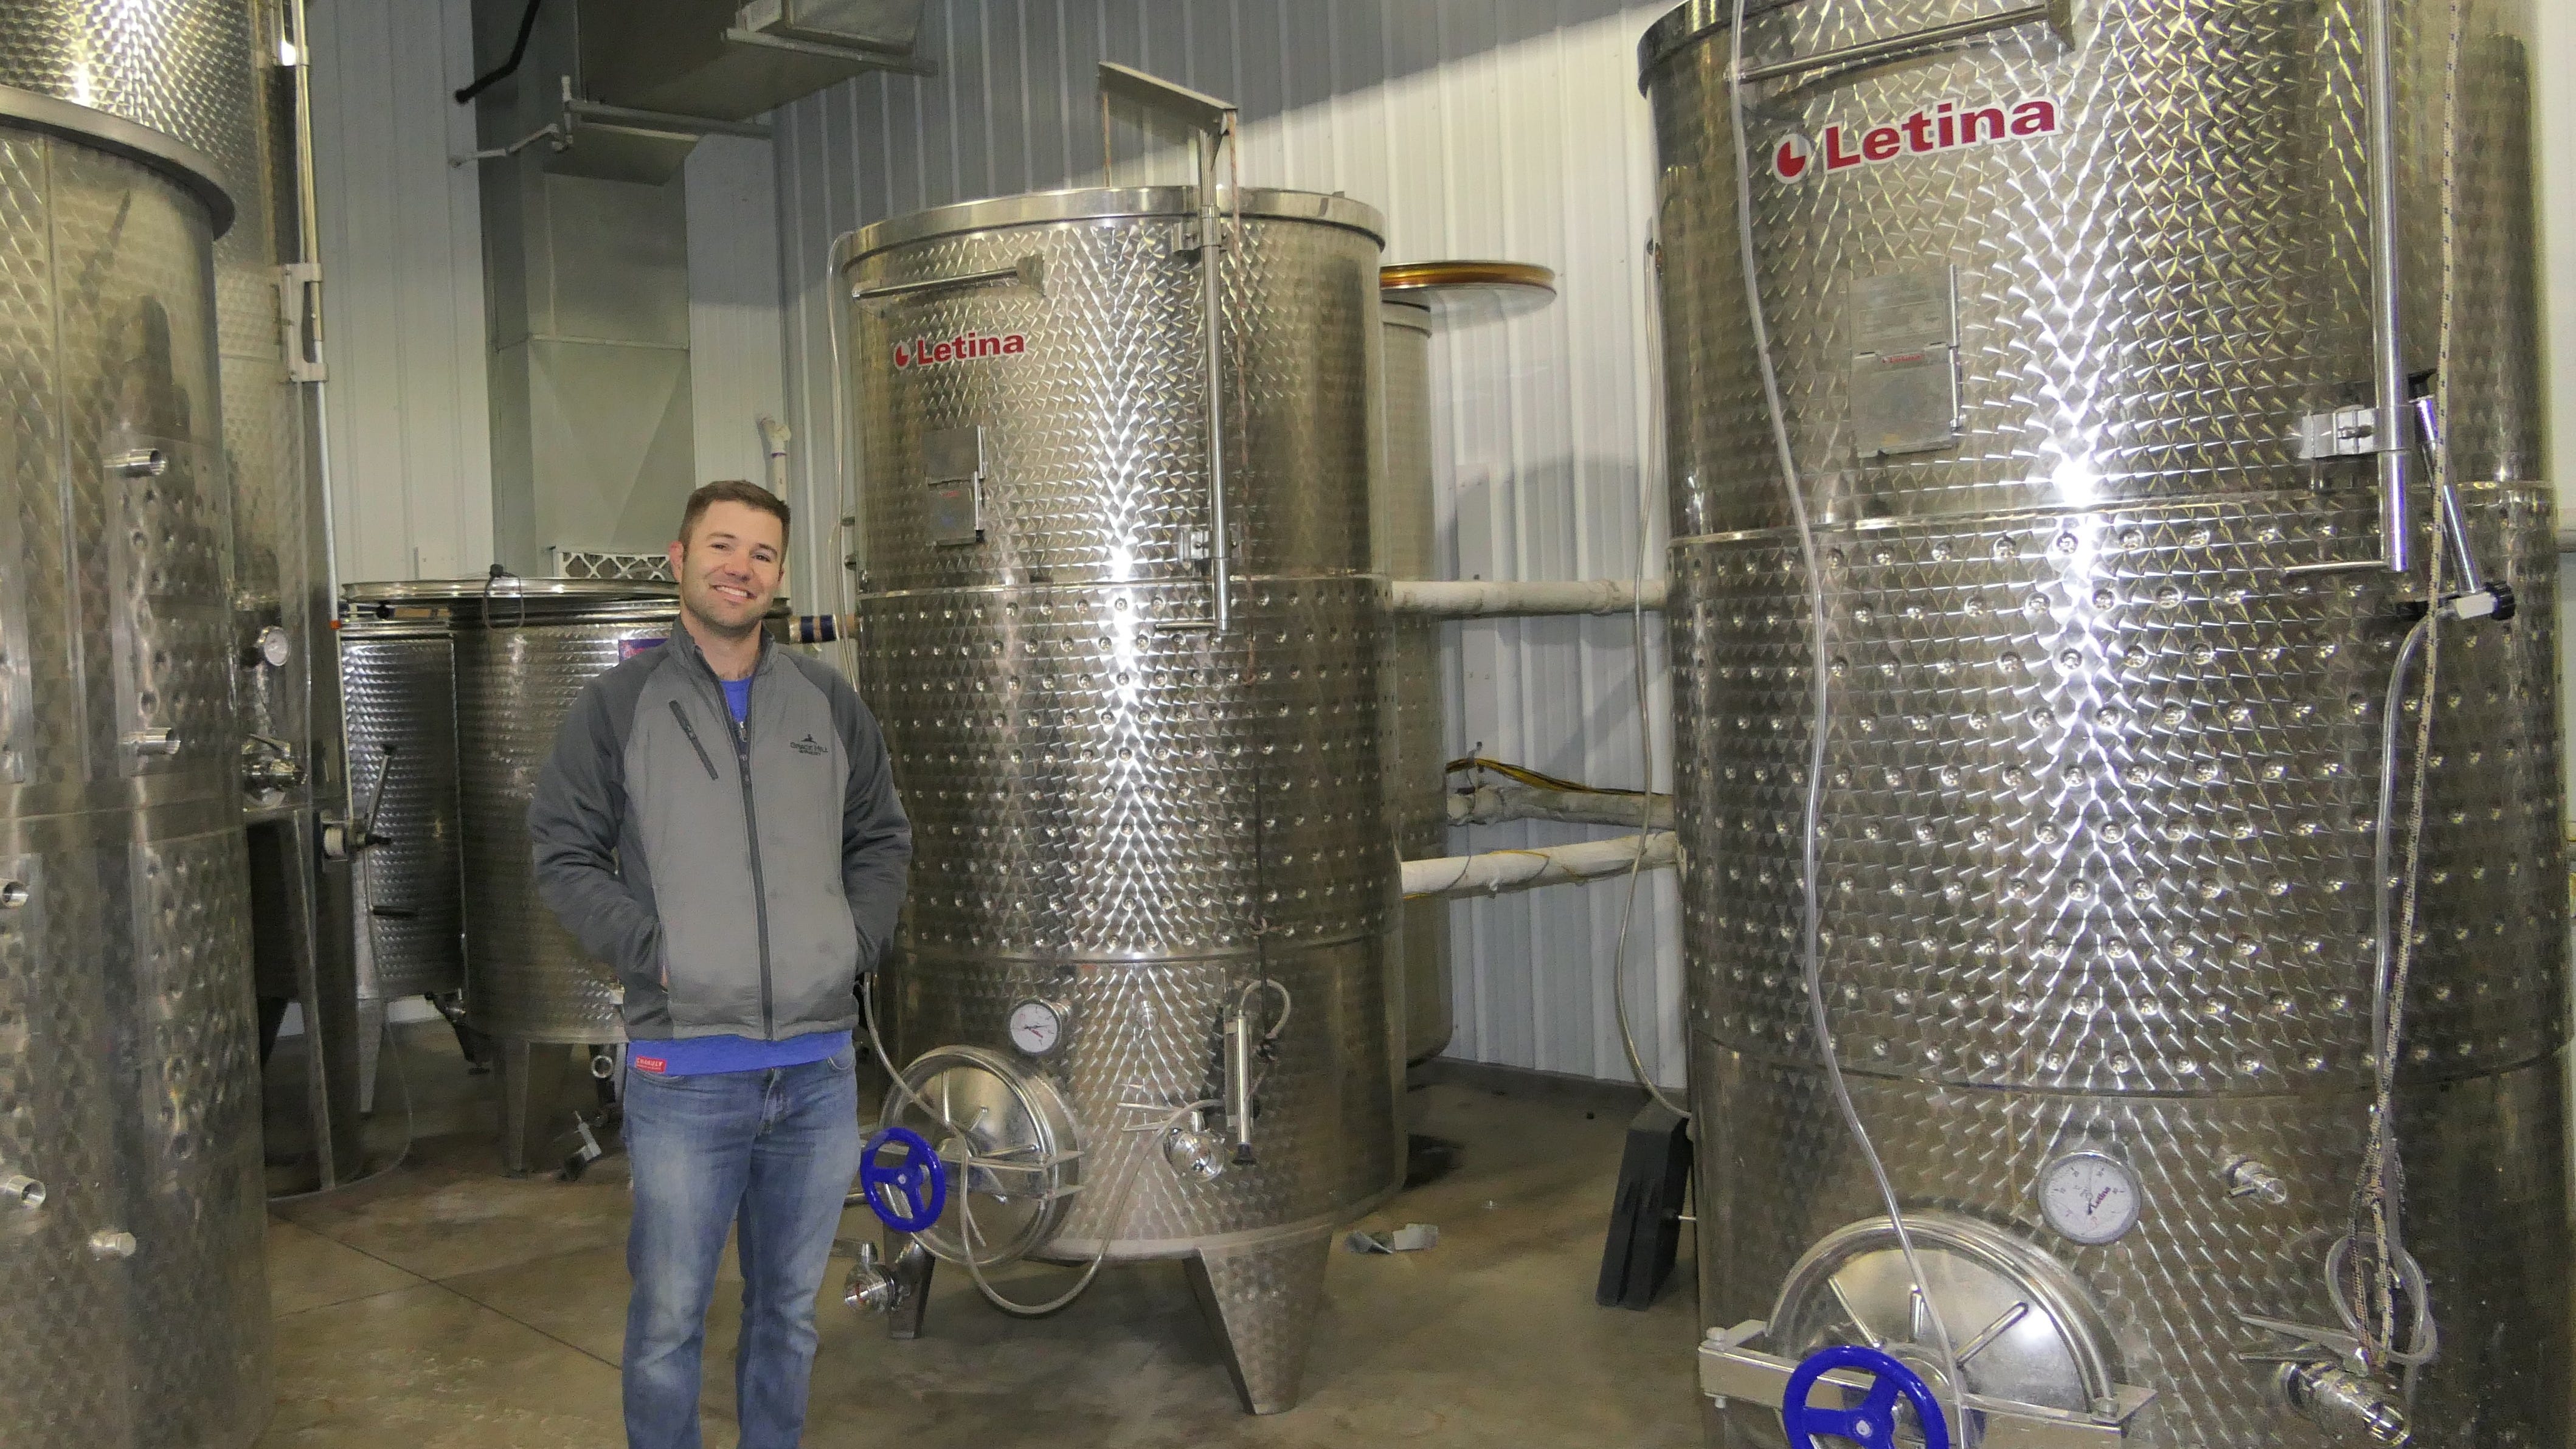 Jeff Solo, the manager at Grace Hill Winery, stands in front of wine tanks at the winery in Whitewater.